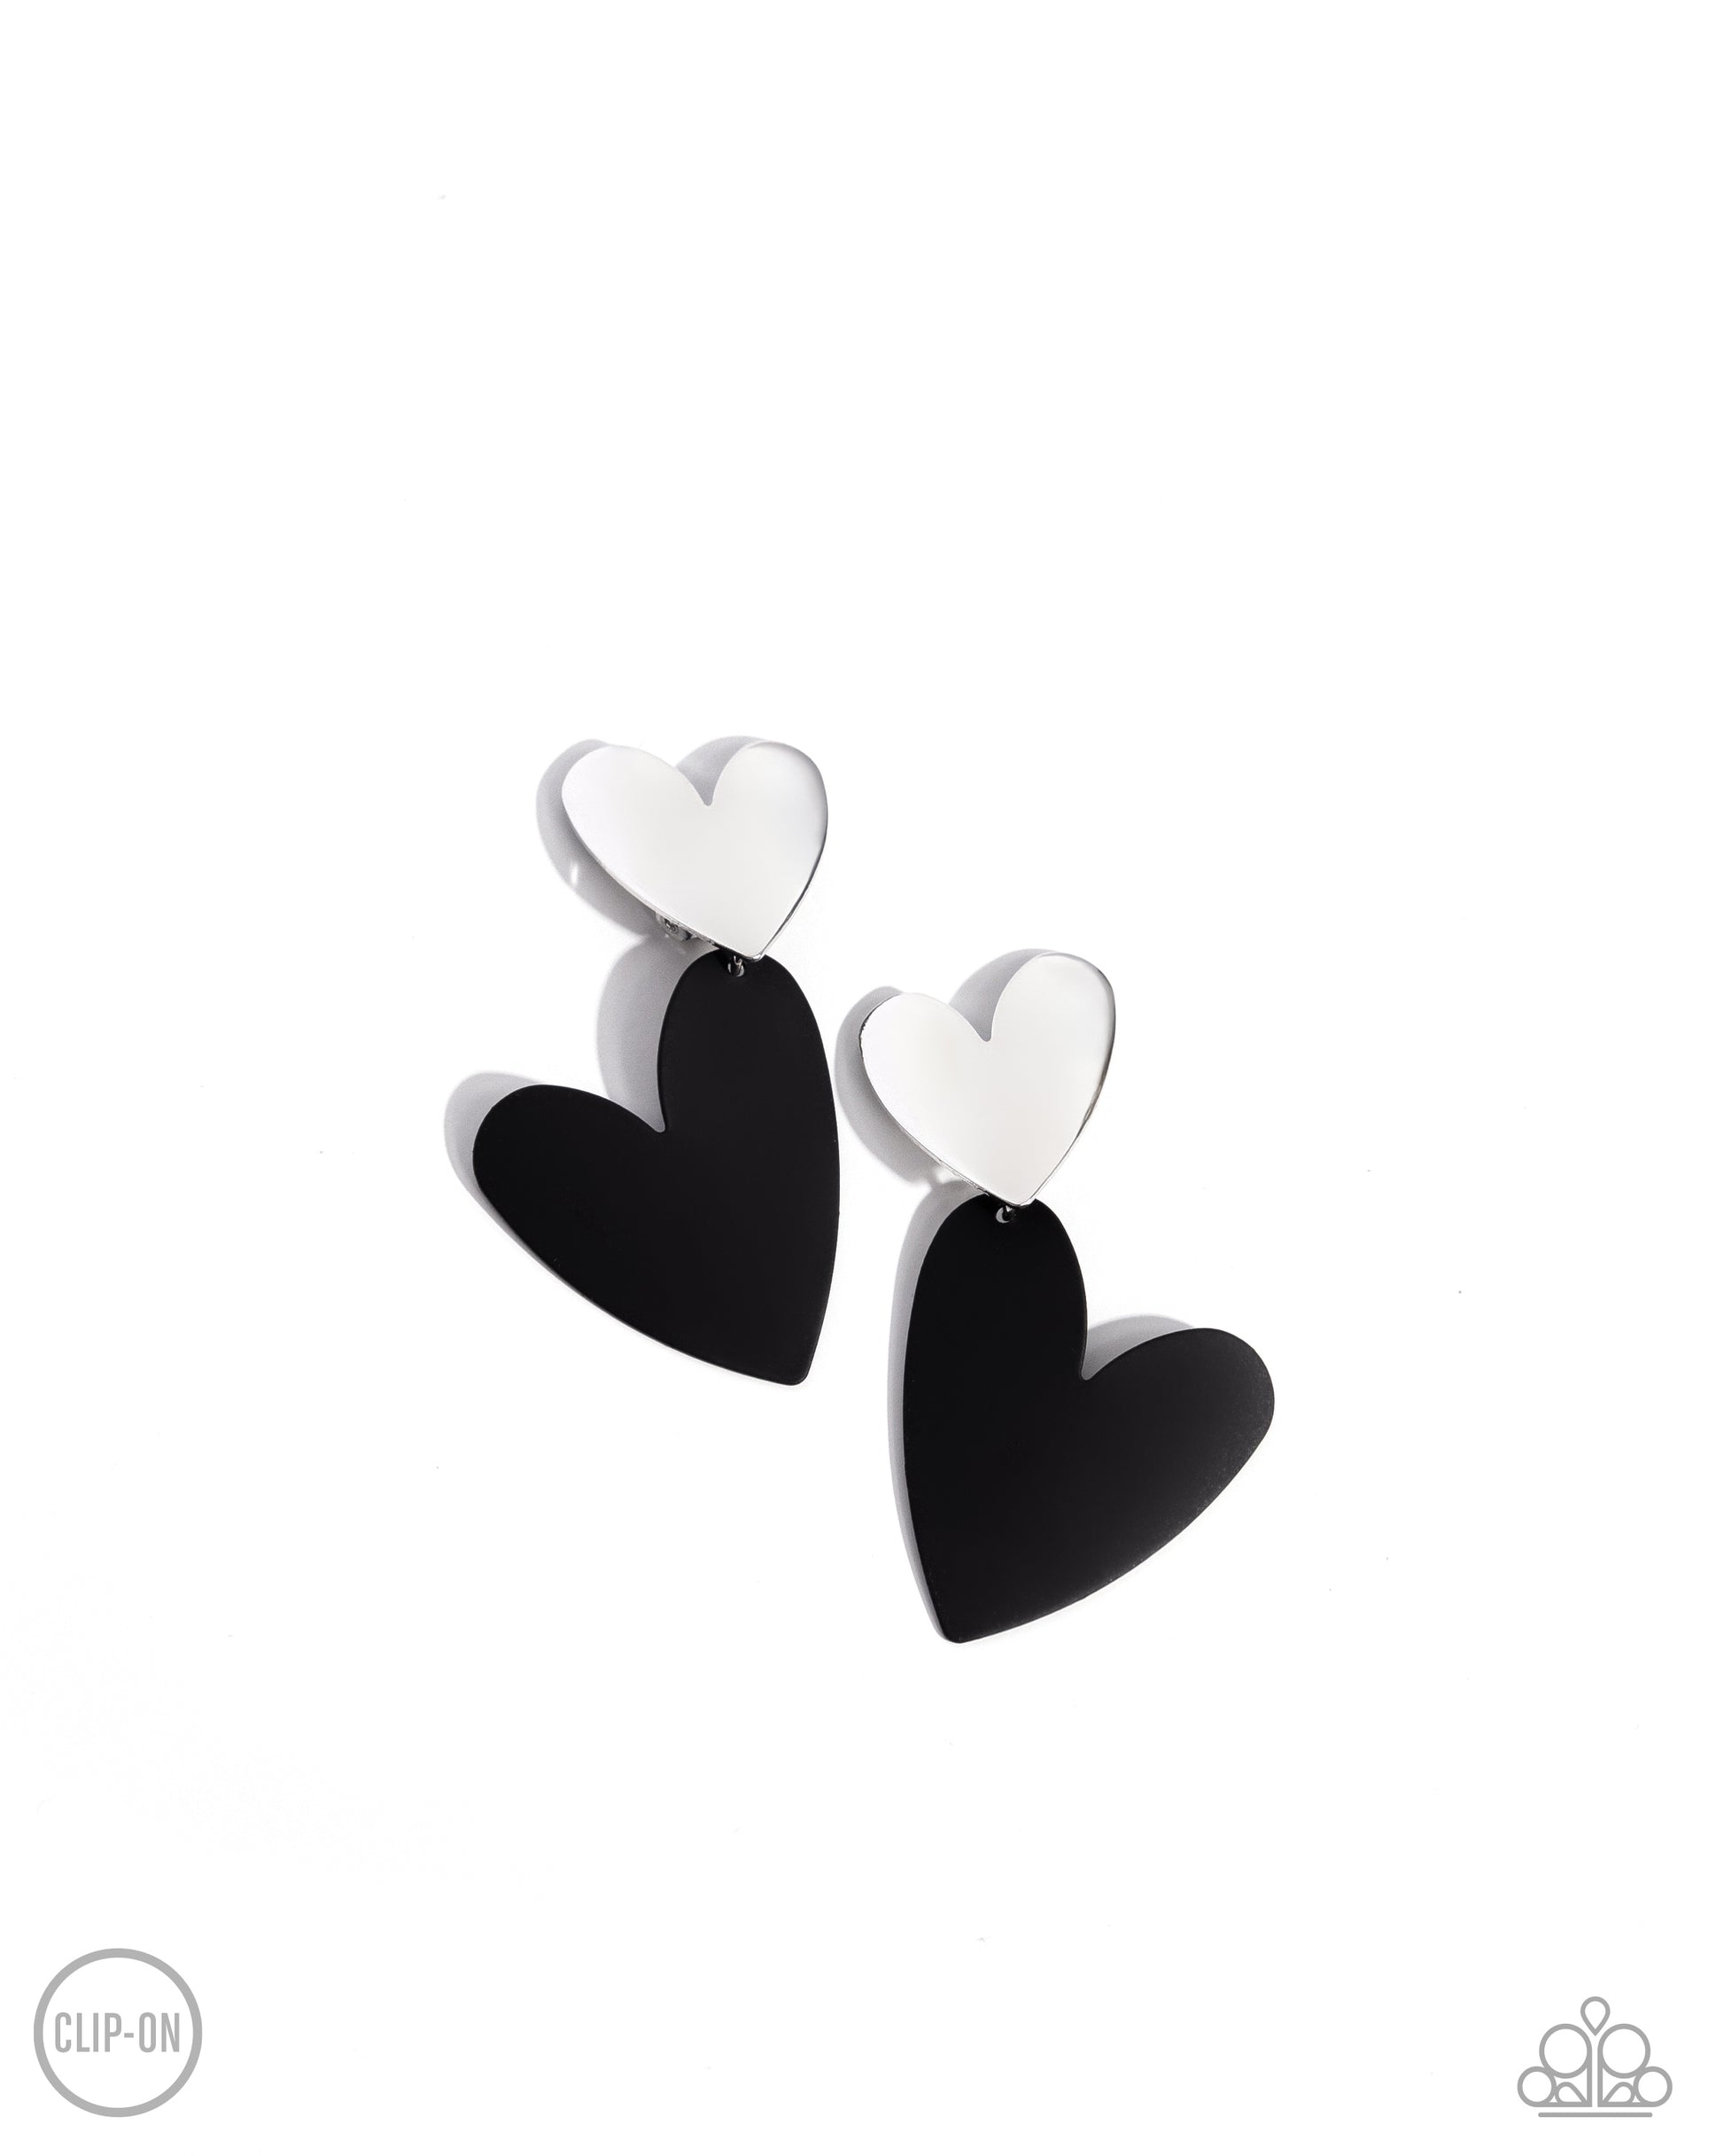 Romantic Occasion - black - Paparazzi CLIP ON earrings